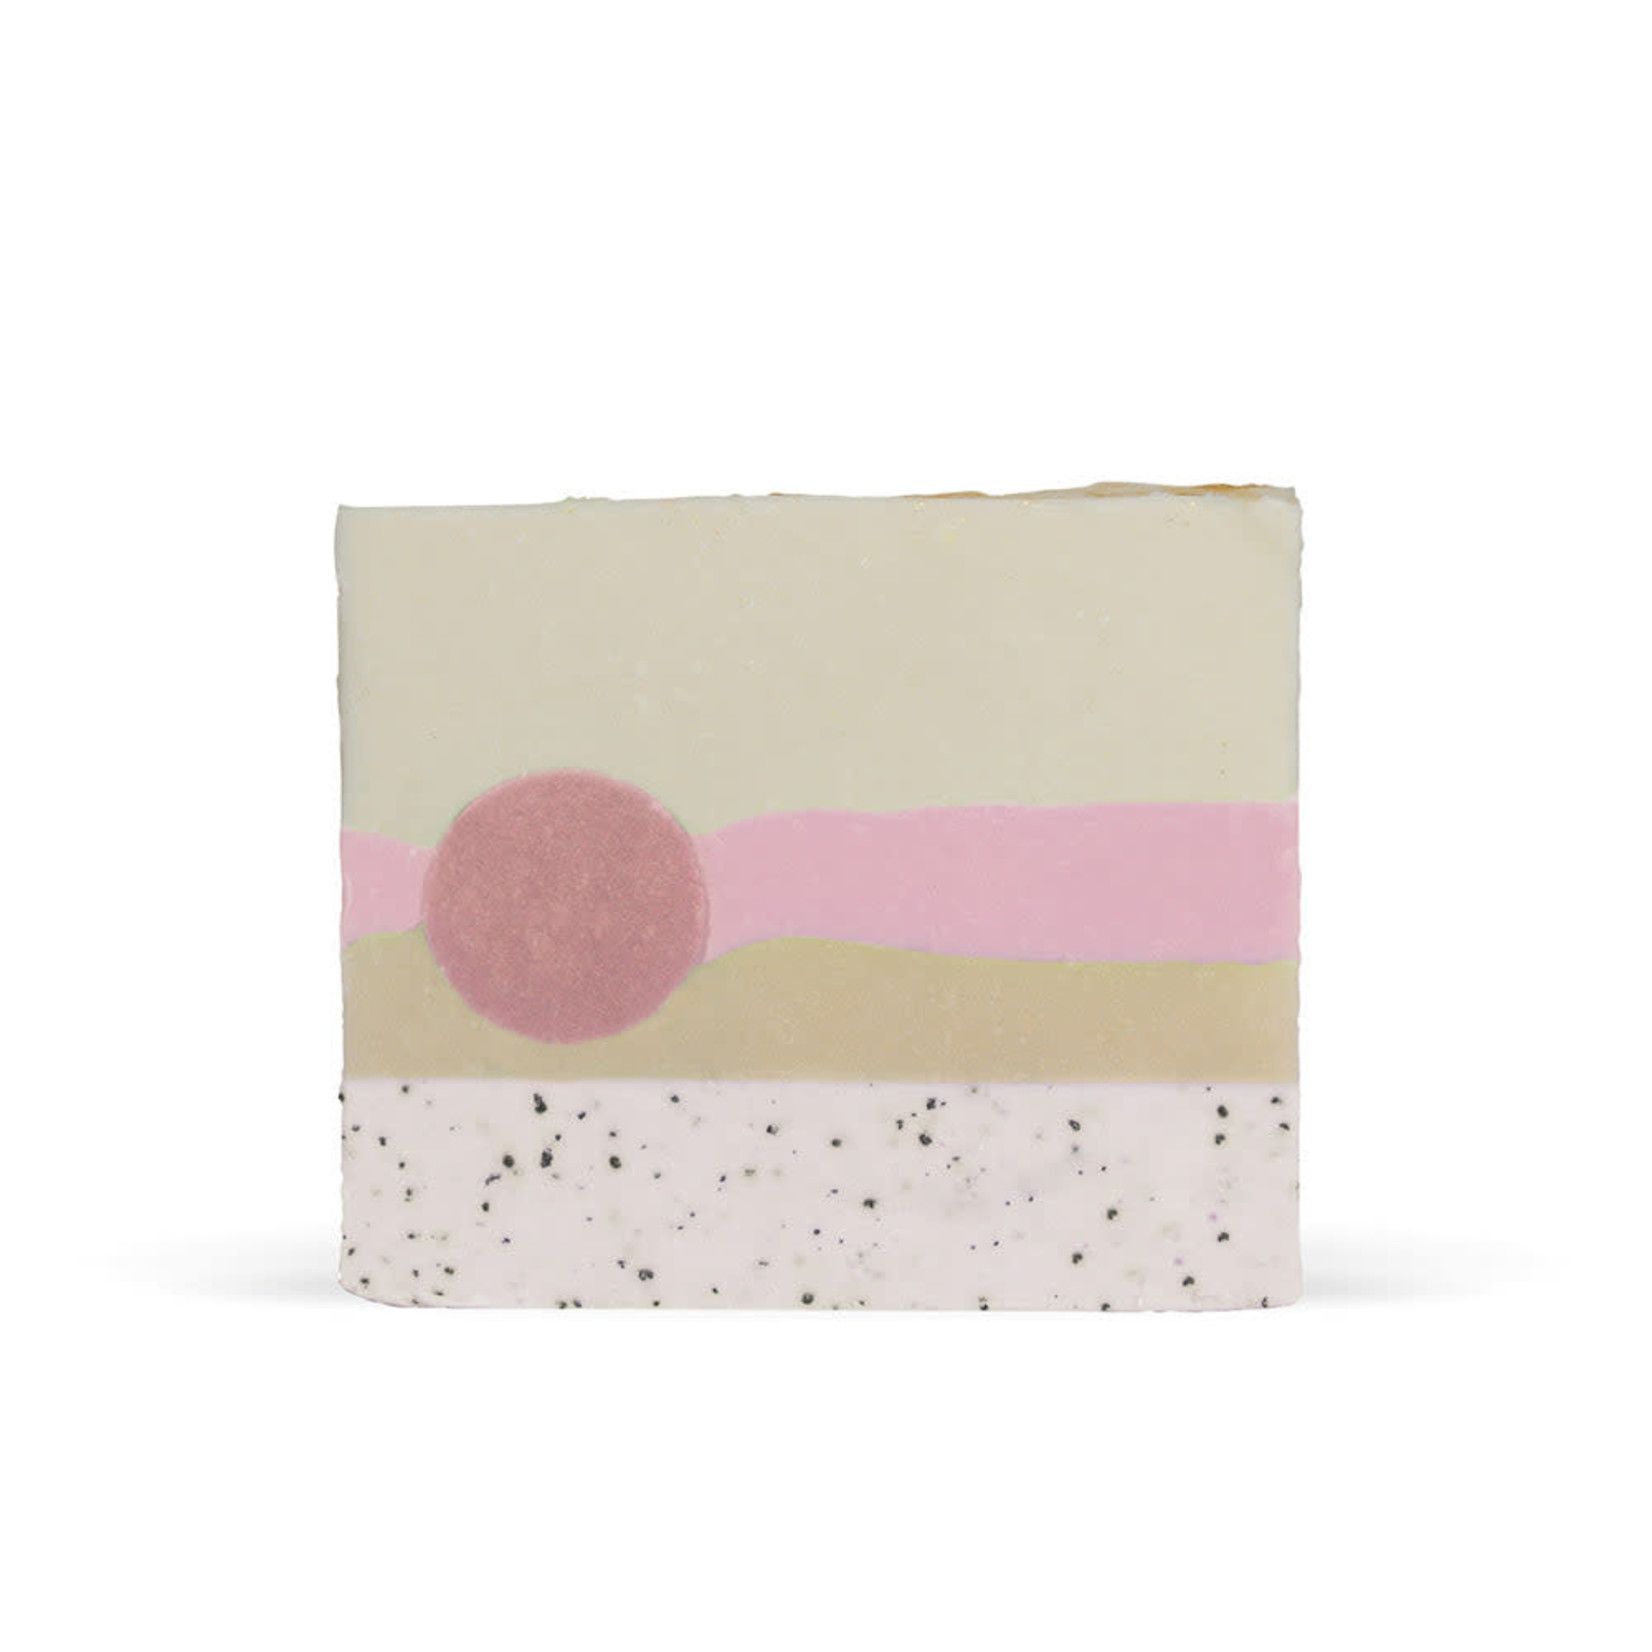 Finch Berry Season of Soap (6 Bar Soap Pack) - SPRING